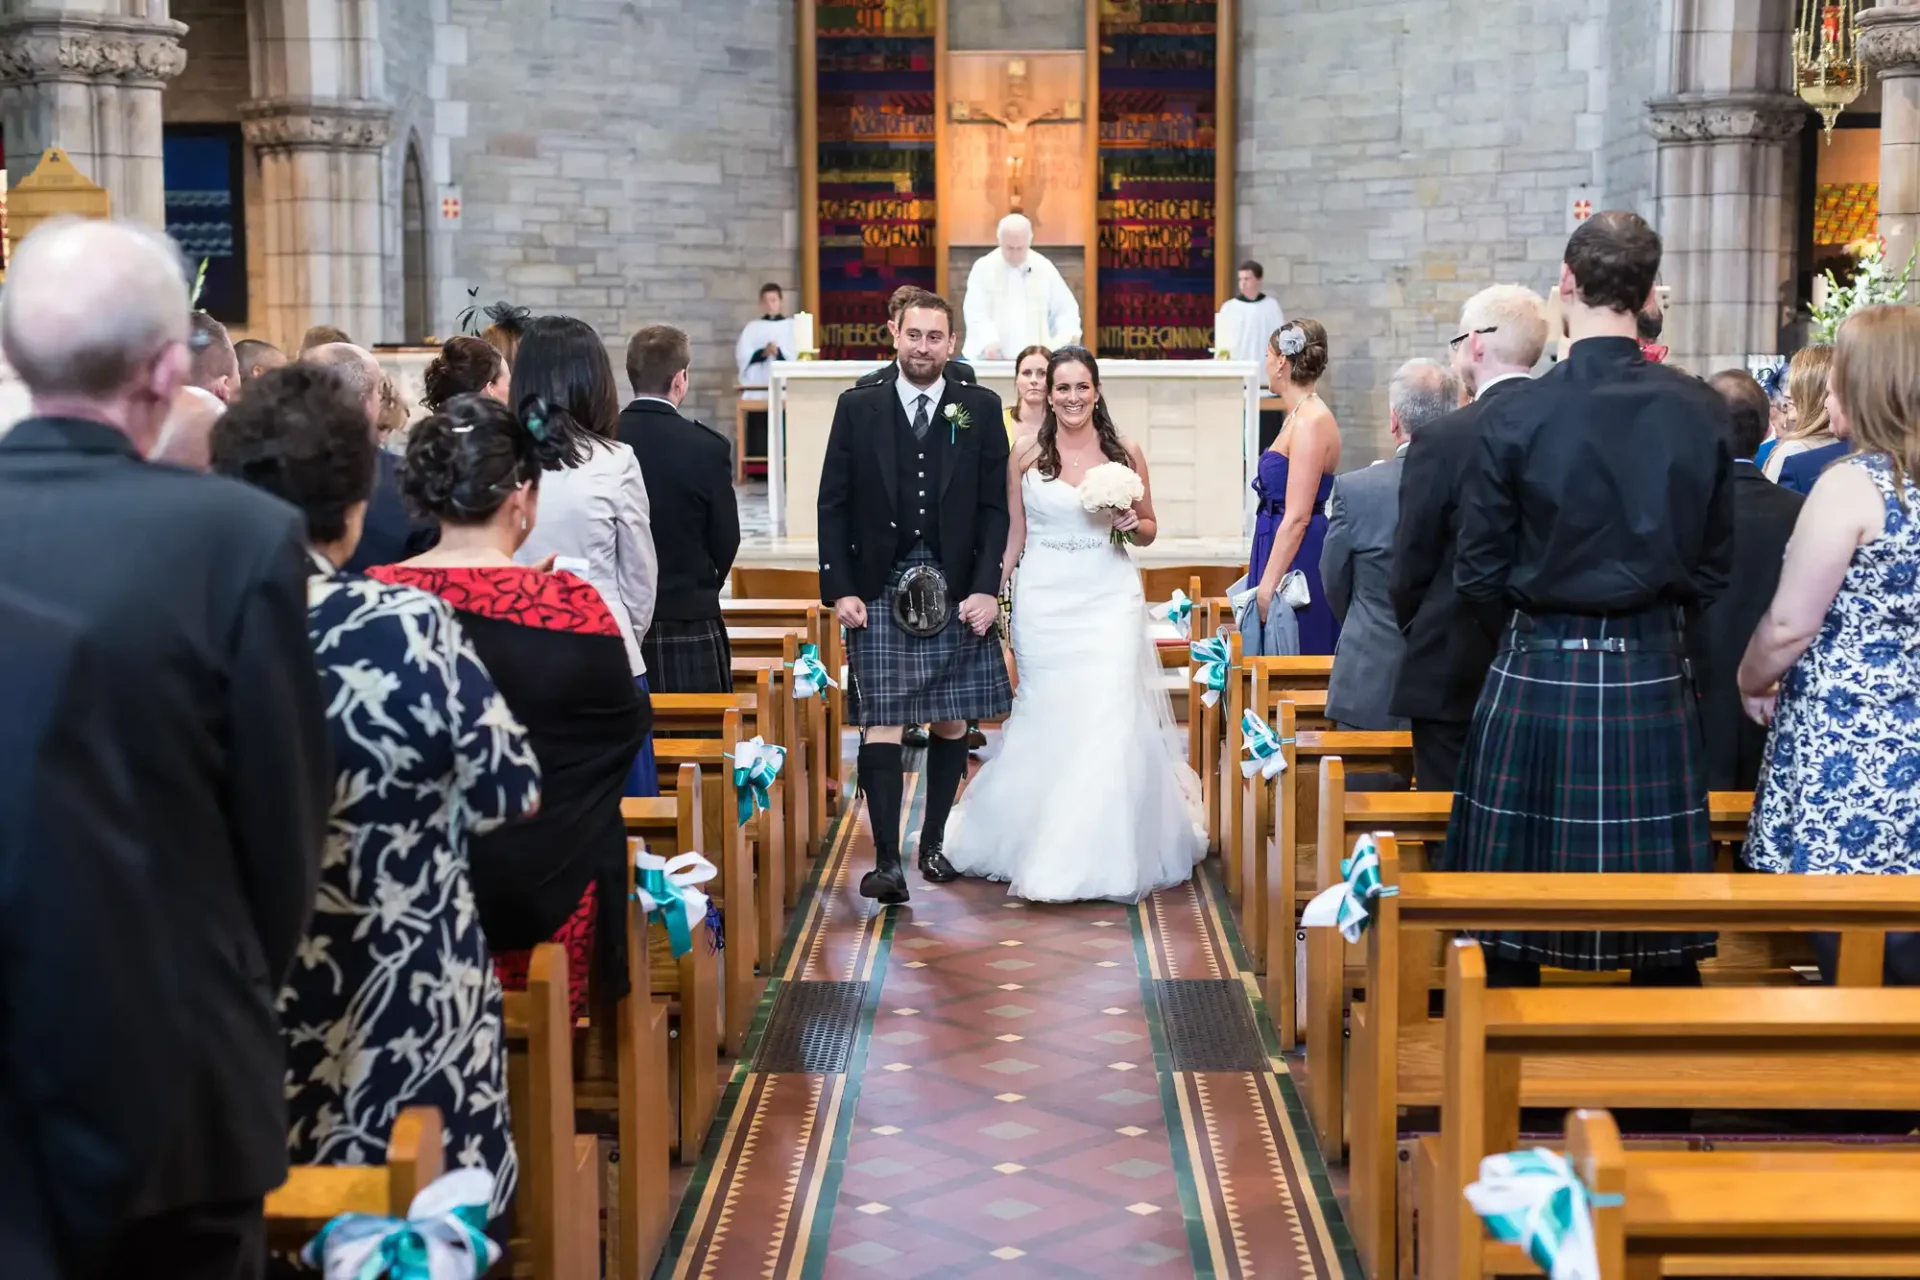 A bride and groom walk down the aisle of a church, guests watching, groom in a kilt, blue ribbon decorations on pews.